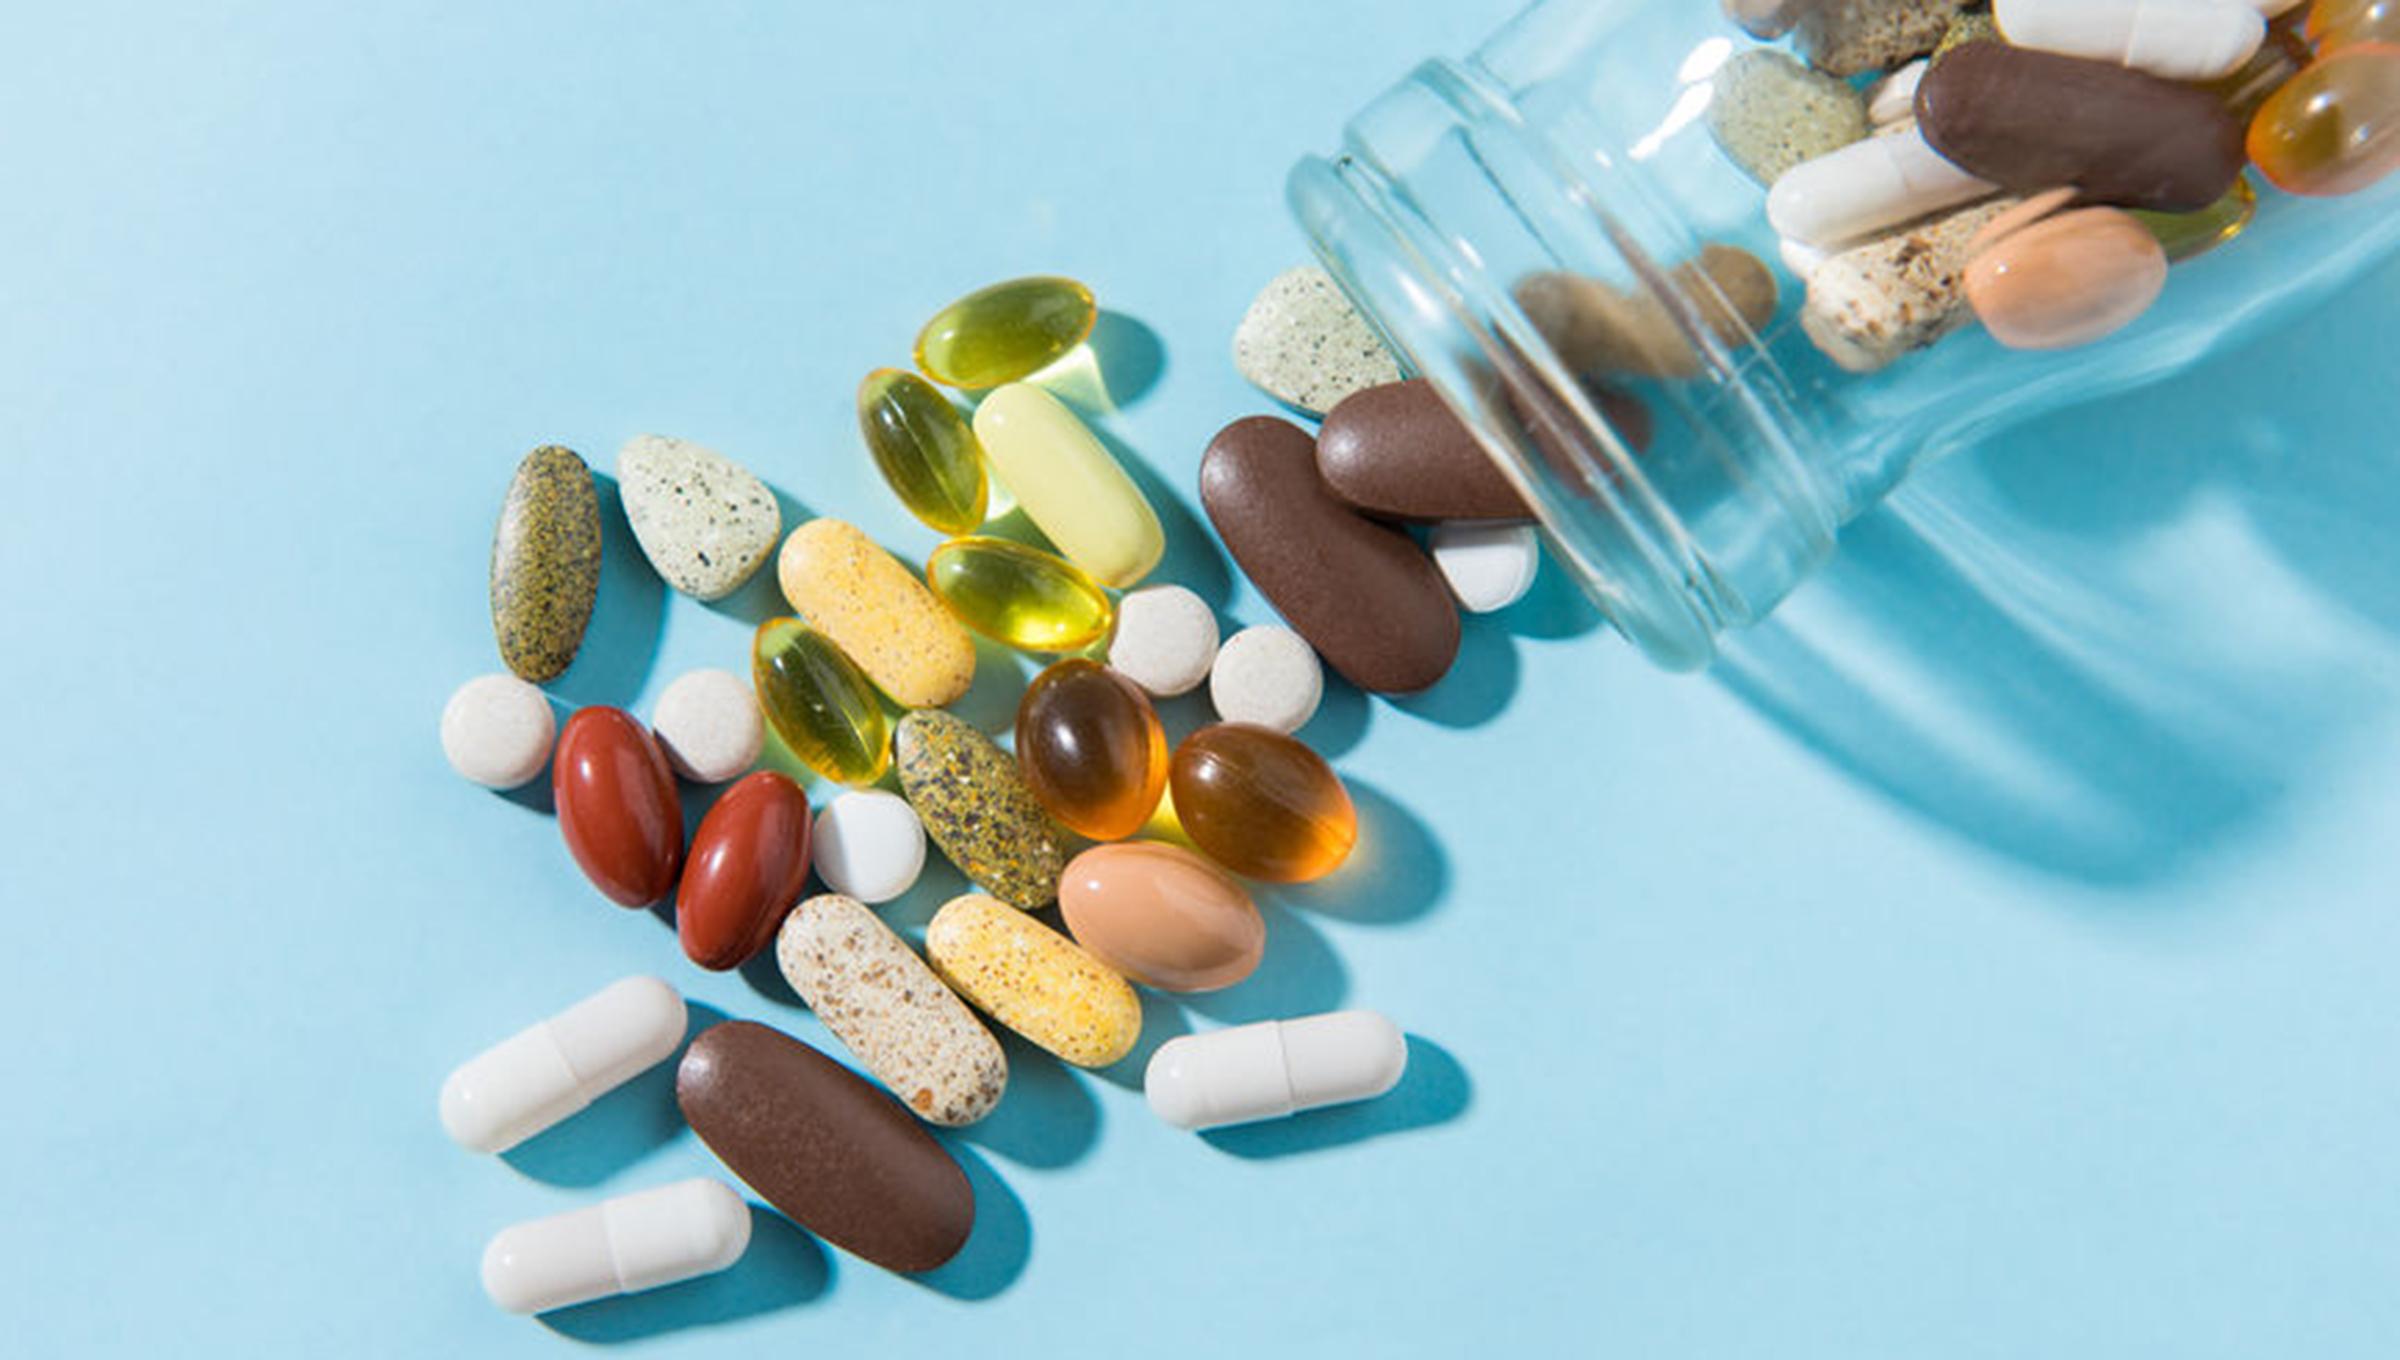 Vitamin Supplement Imports Top $9m in 4 Months | Financial Tribune